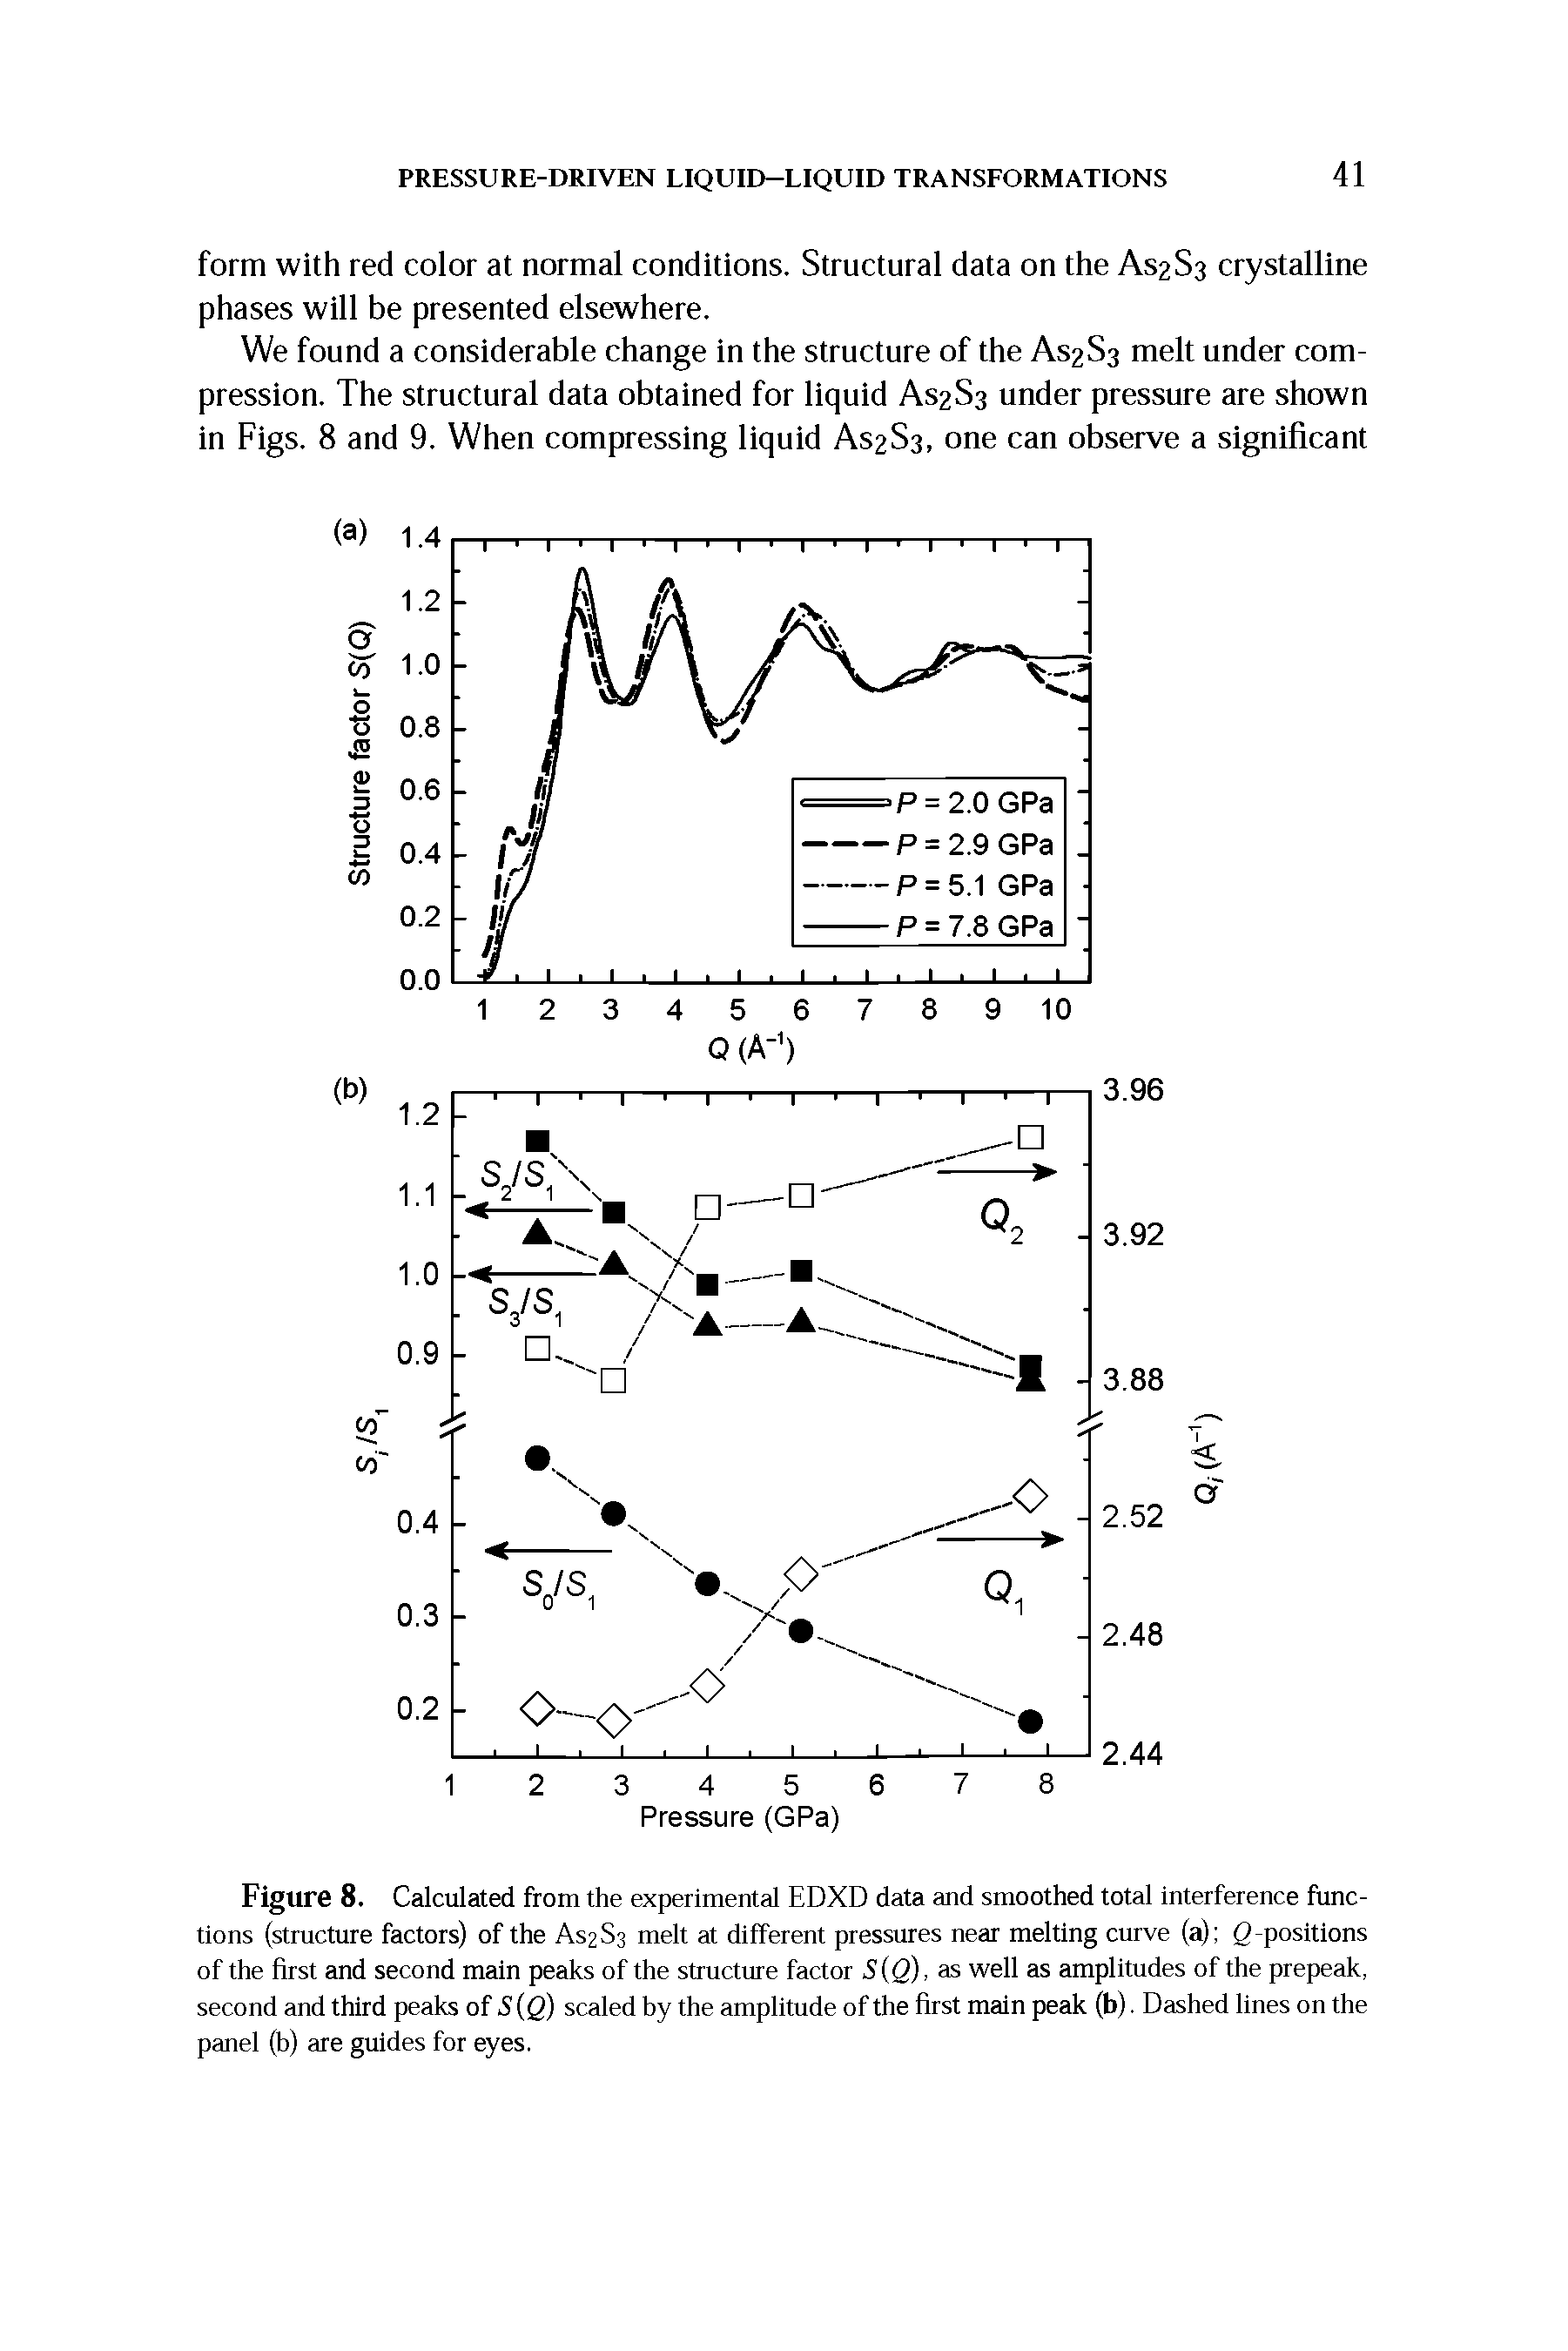 Figure 8. Calculated from the experimental EDXD data and smoothed total interference functions (structure factors) of the AS2S3 melt at different pressures near melting curve (a) g-positions of the first and second main peaks of the structure factor S(Q), as well as amplitudes of the prepeak, second and third peaks of S(Q) scaled by the amplitude of the first main peak (b). Dashed lines on the panel (b) are guides for eyes.